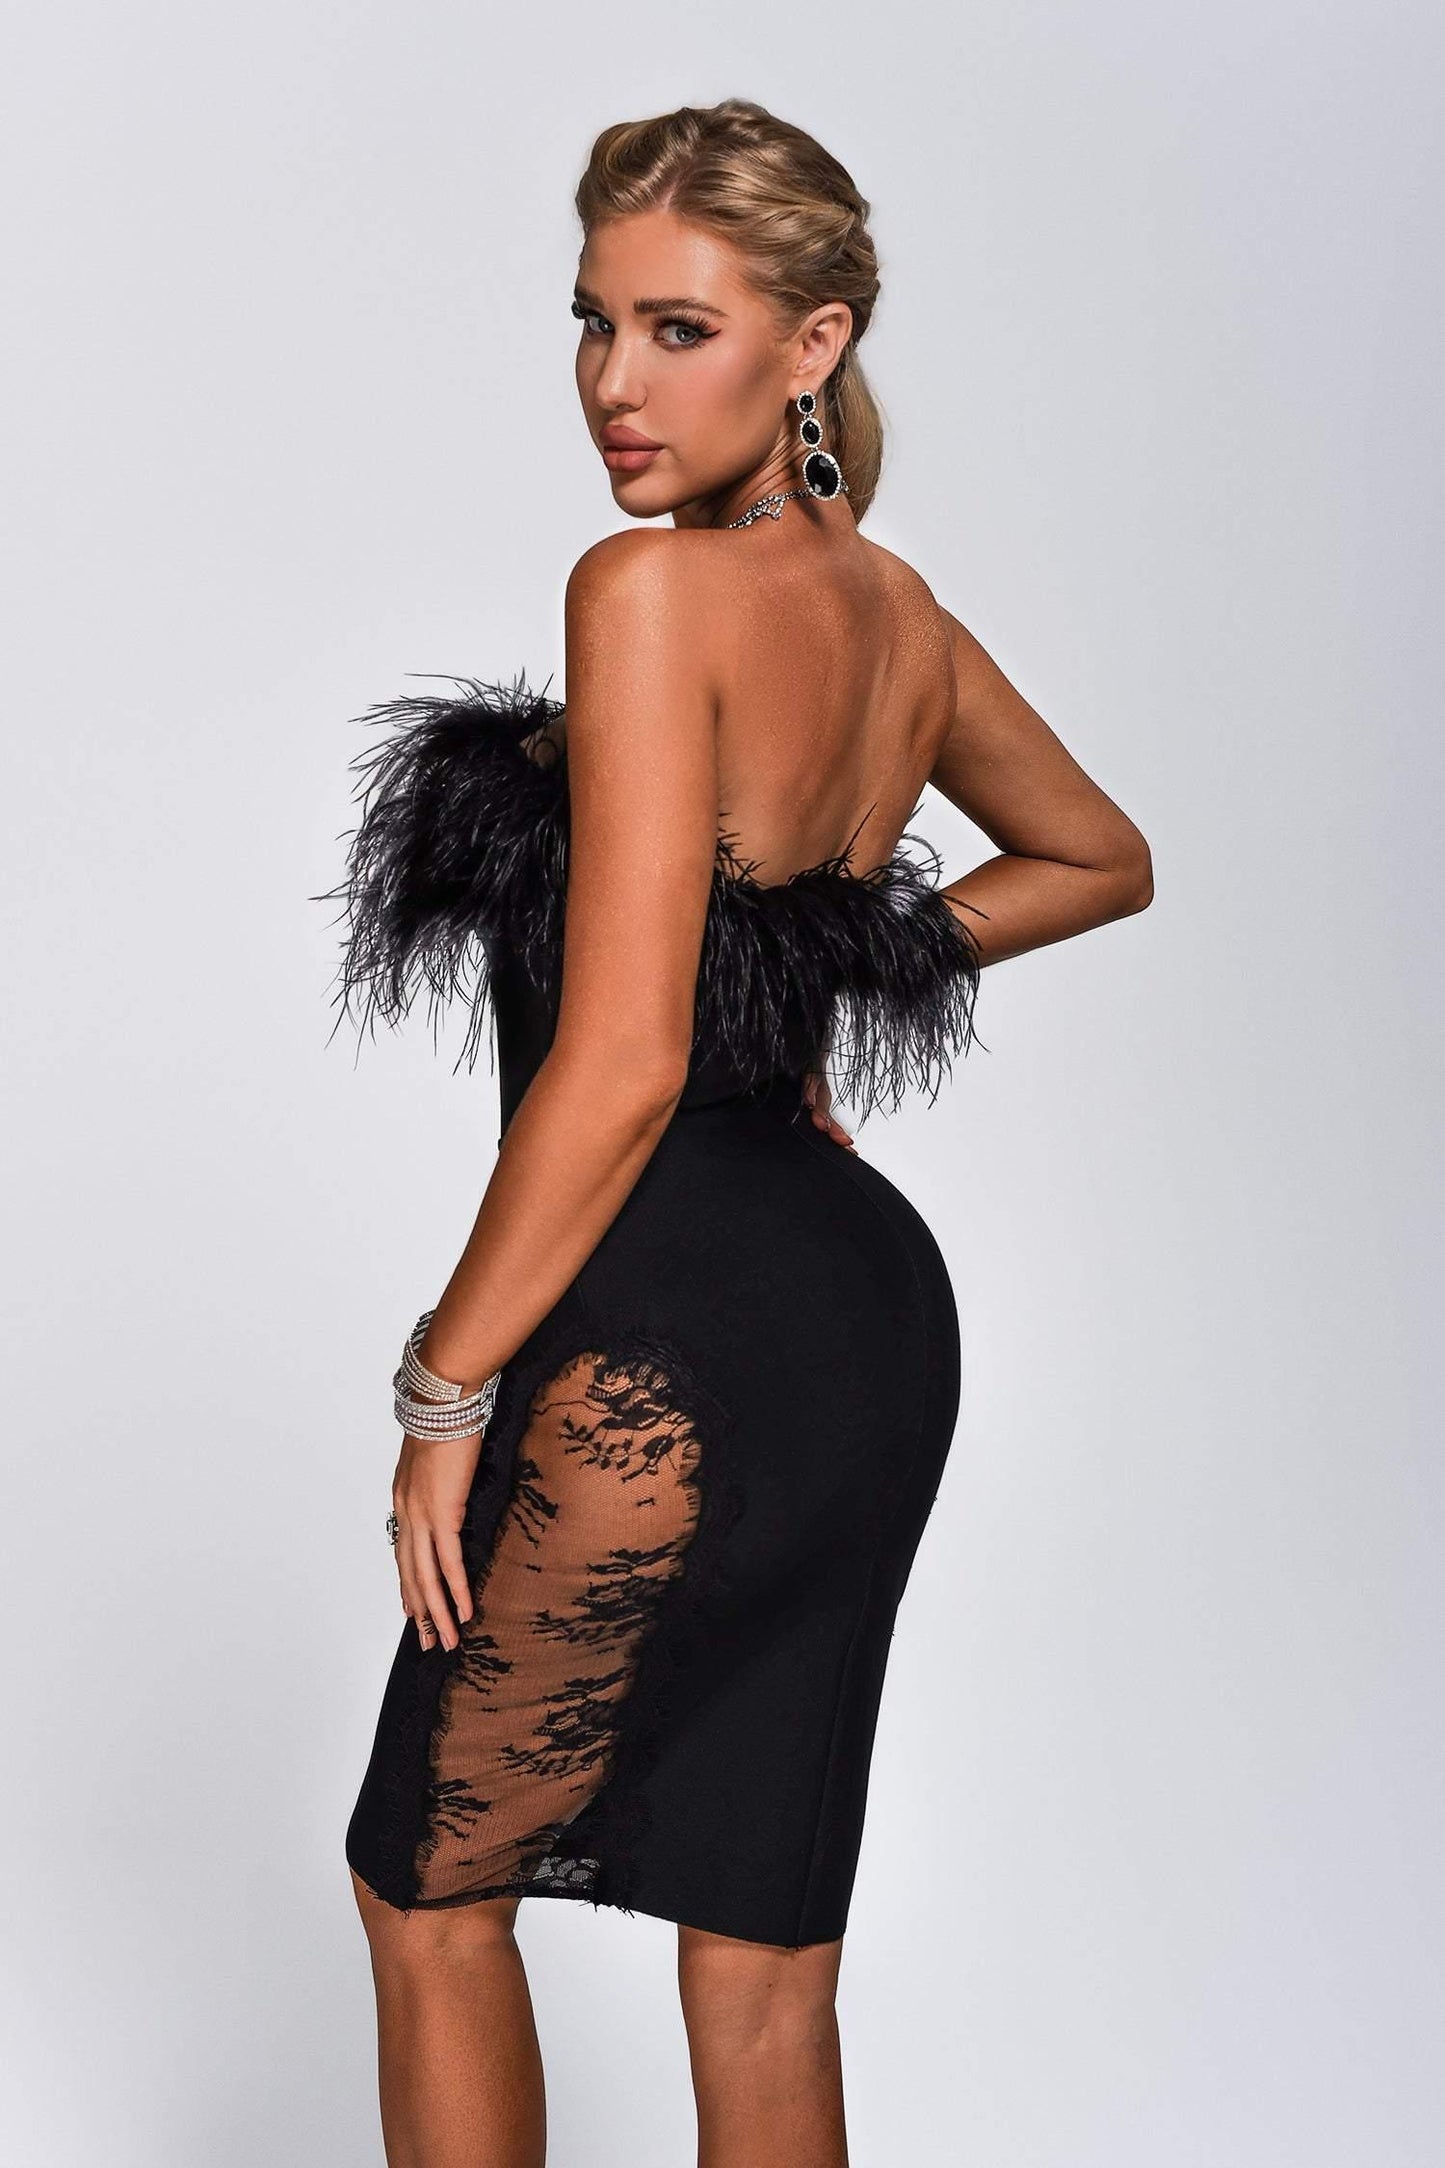 European And American Fashion Sexy Tube Top Ostrich Feather Mesh Lace Bandage One-piece Dress aclosy